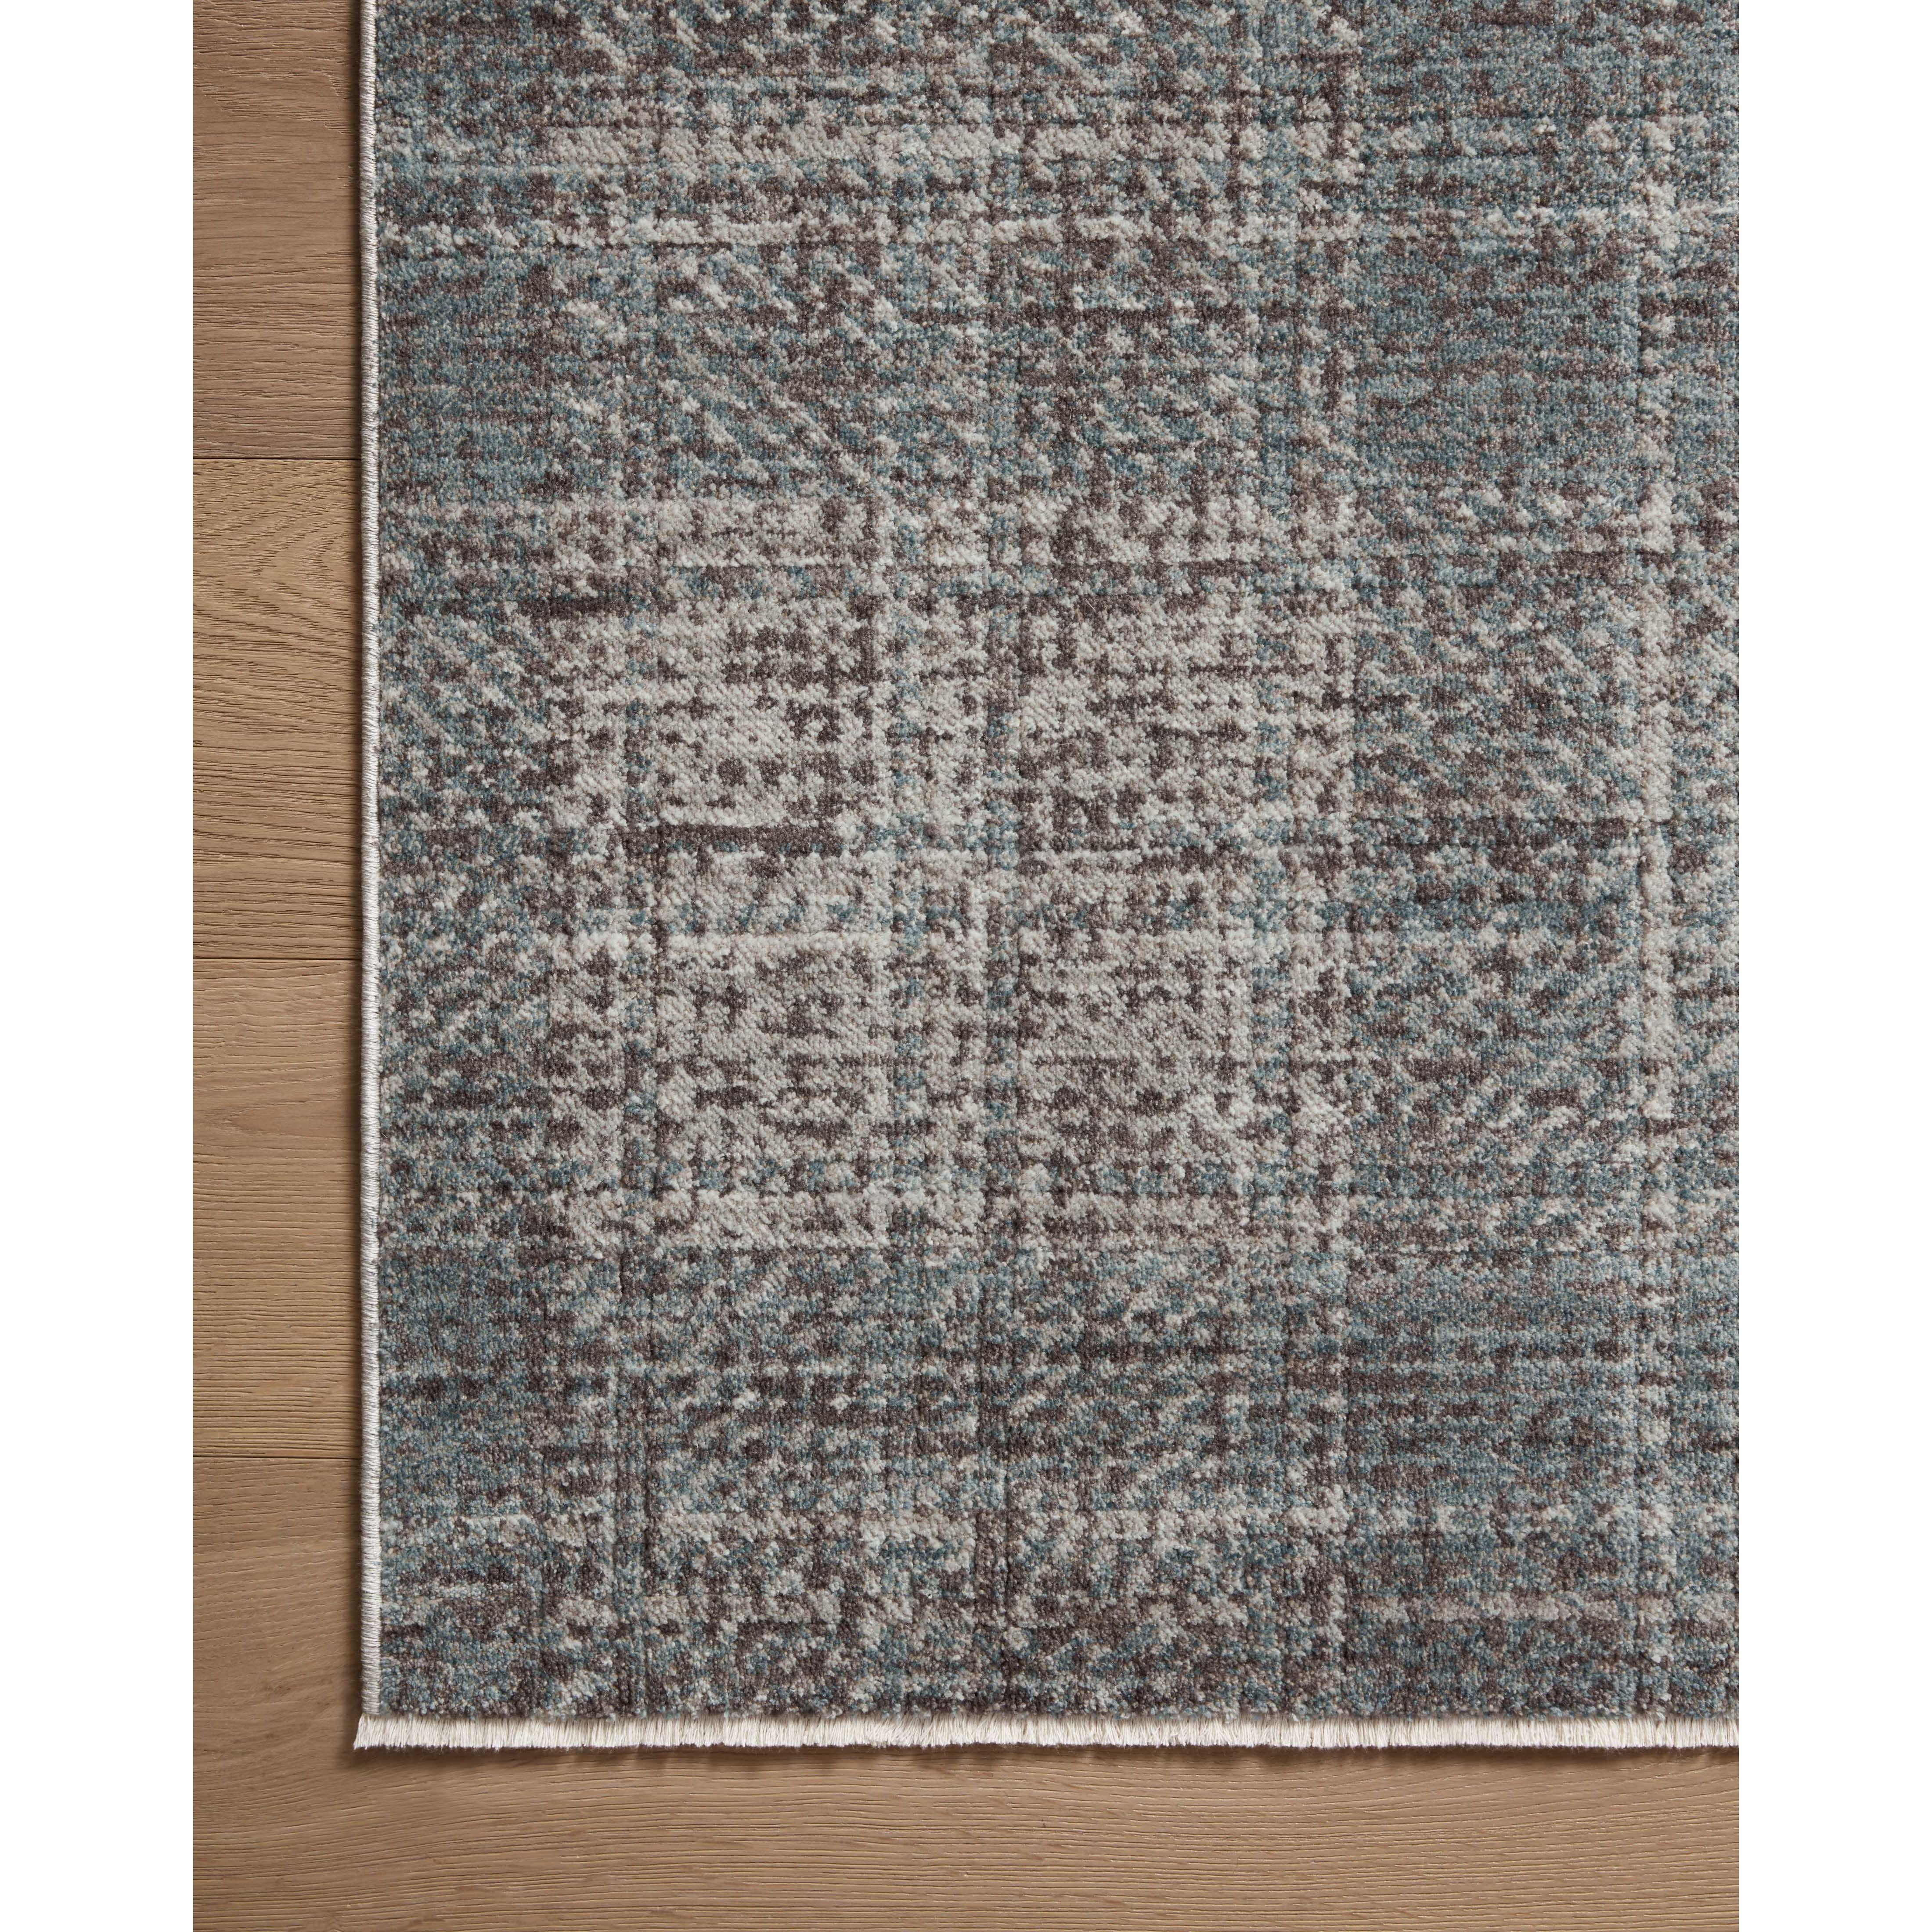 The Ember Collection by Angela Rose x Loloi is a modern flatweave area rug with a timeless plaid pattern that adds depth and coziness to any living room, bedroom, dining room, or hallway. Ember is power-loomed of 100% space-dyed polyester, a durable construction that creates a nuanced depth of color, available in a range of neutral palettes. Amethyst Home provides interior design, new home construction design consulting, vintage area rugs, and lighting in the Alpharetta metro area.